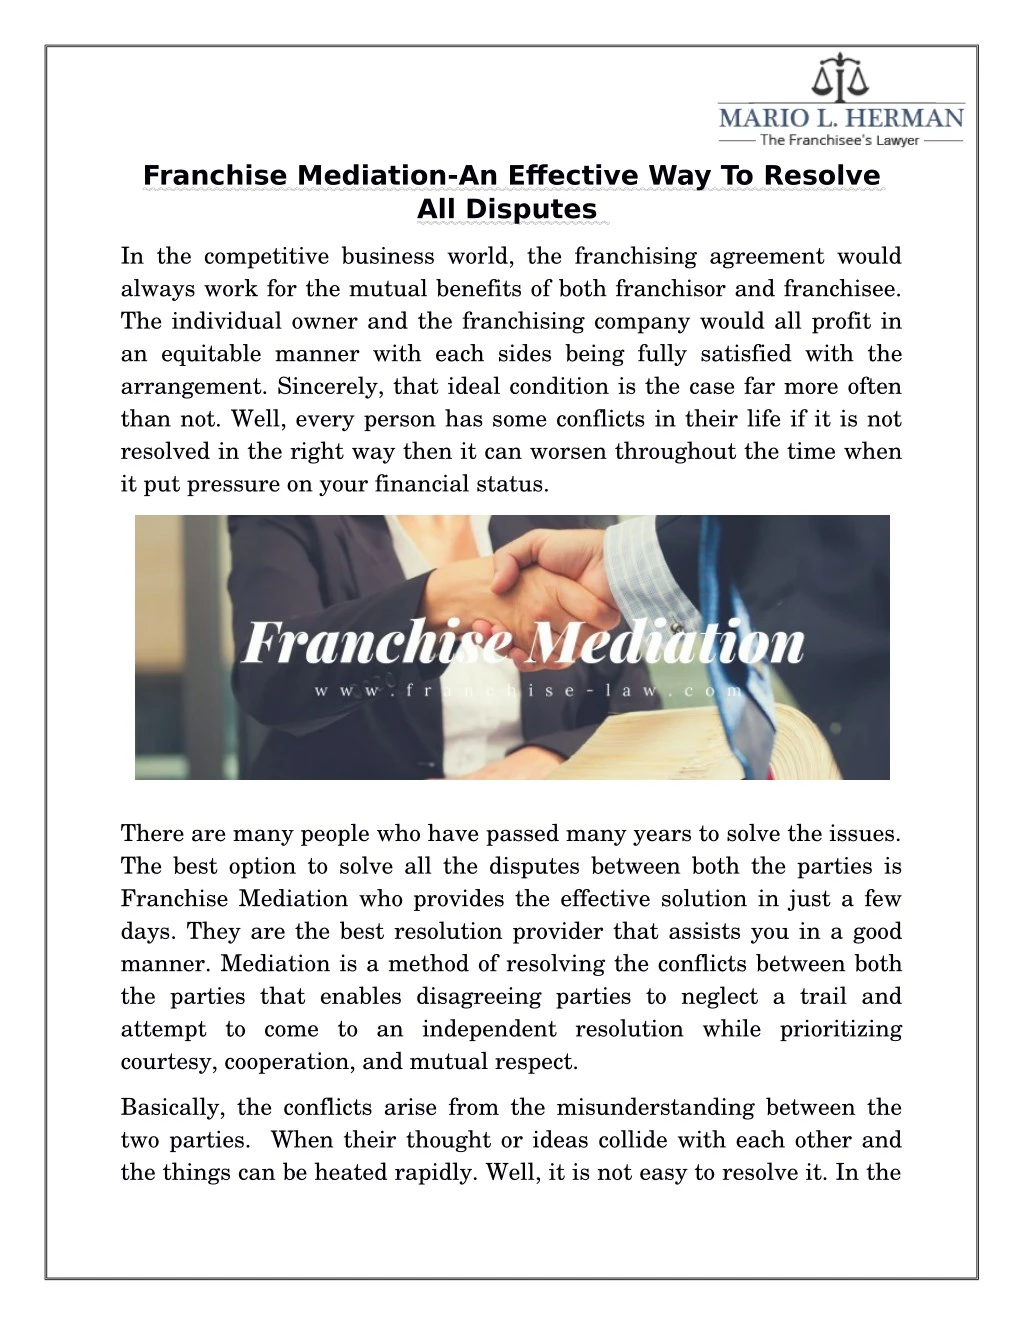 franchise mediation an effective way to resolve